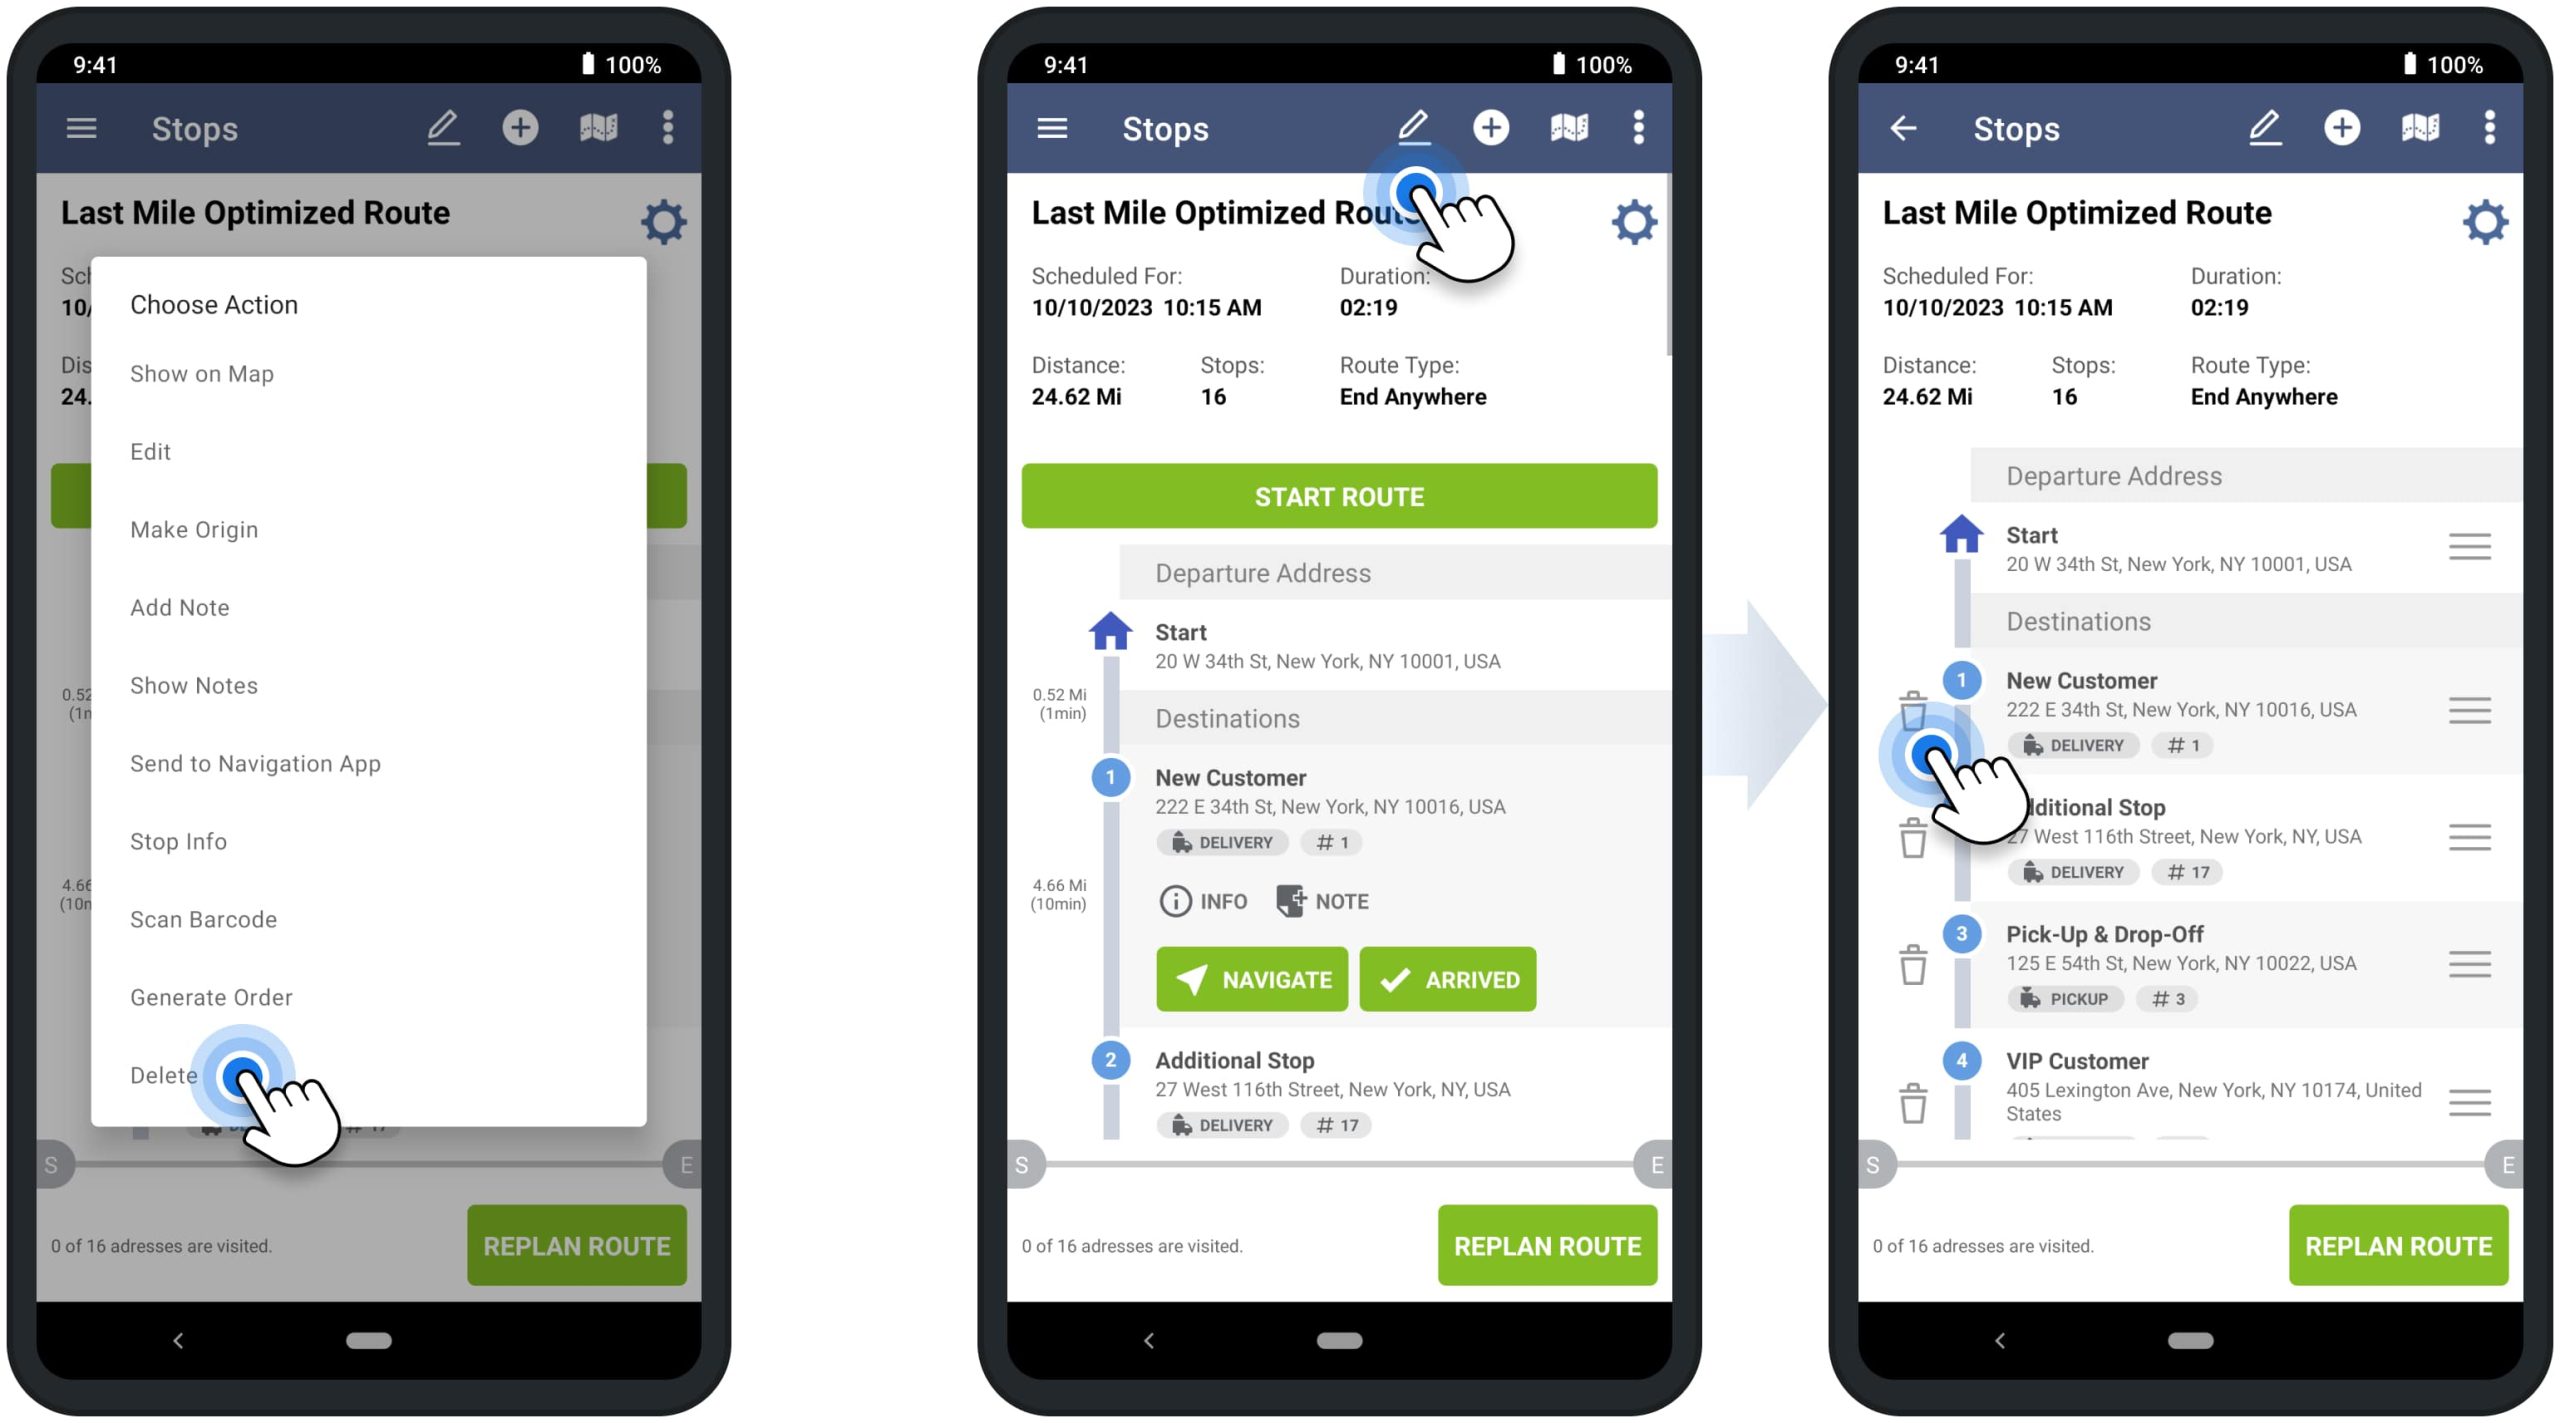 Delete stops and remove addresses from optimized routes on Route4Me's Android route planner app for drivers.